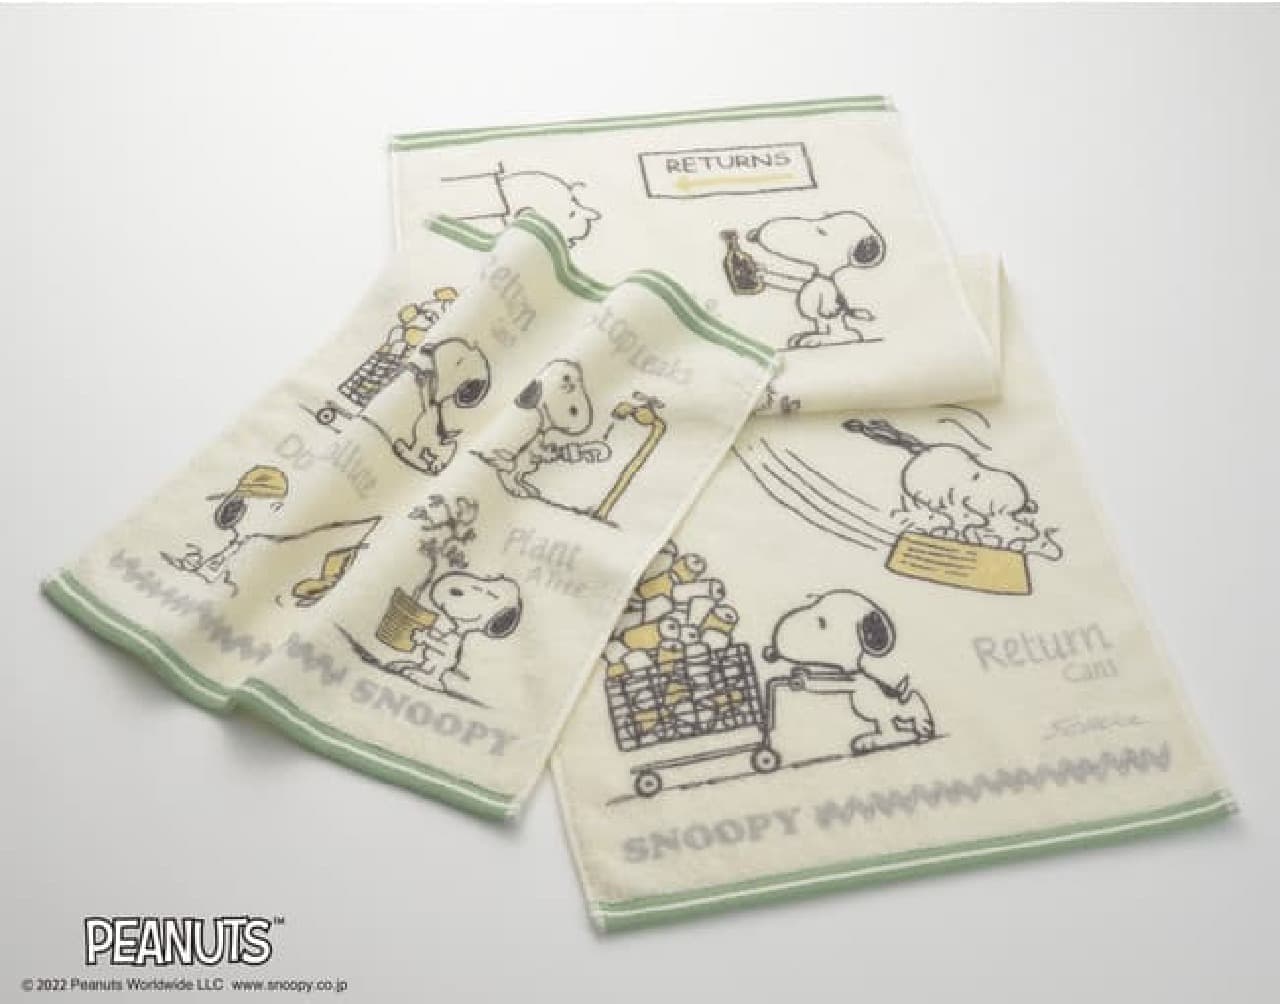 Nishikawa to Launch Spring/Summer "PEANUTS" Bedding -- Snoopy-Patterned Comforter Covers and Pillowcases, etc., and Contact-Cooling Material Mattress Pads